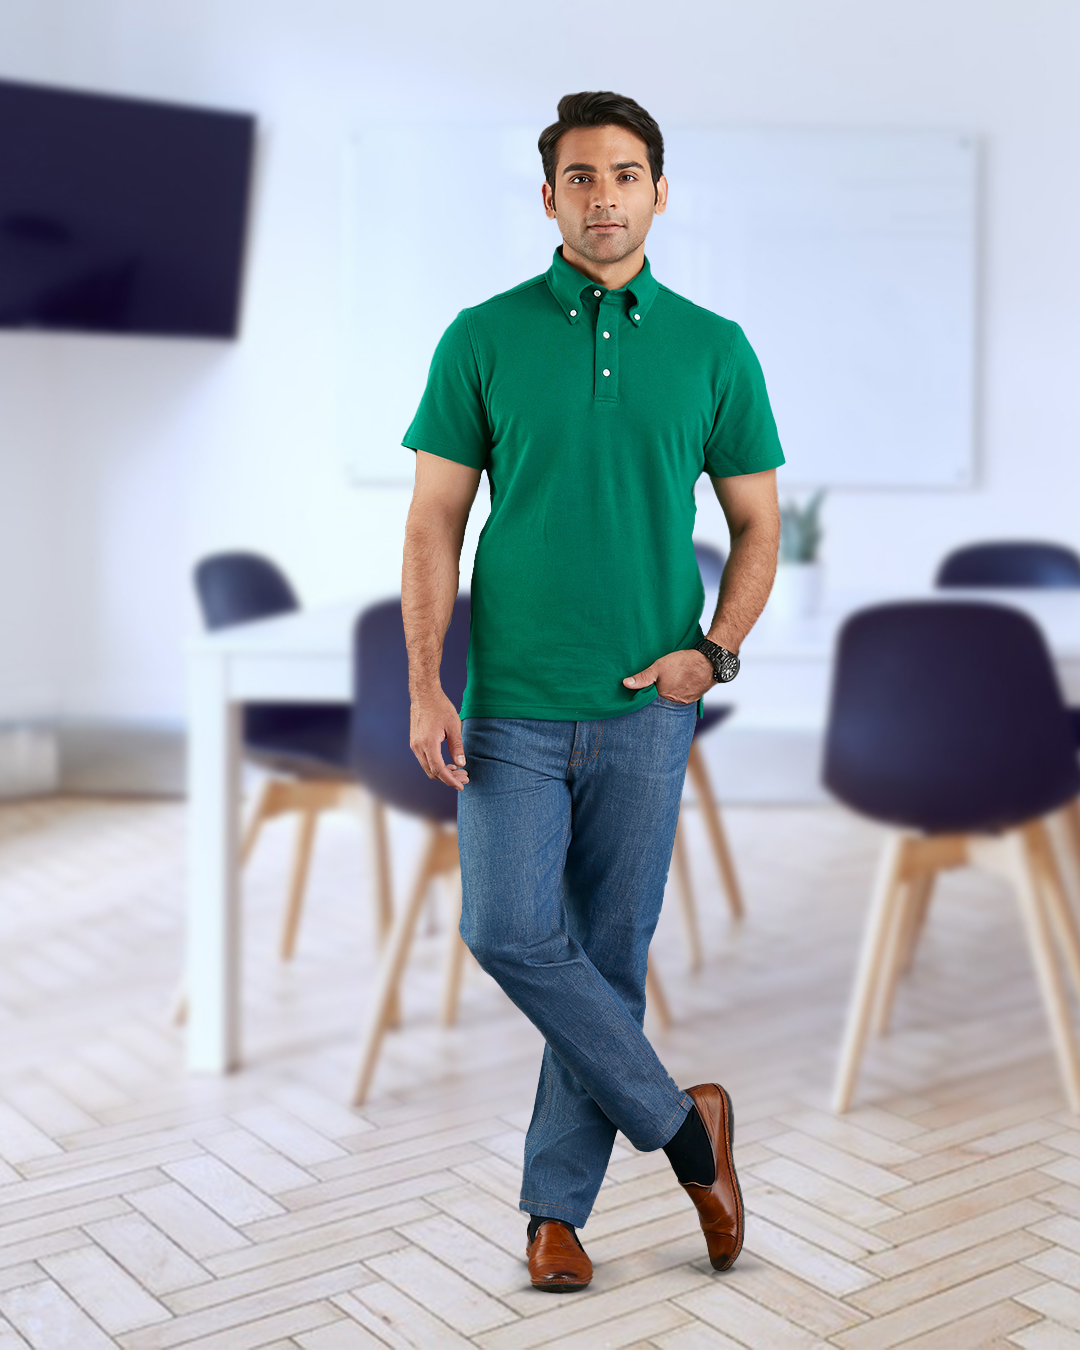 Model wearing the custom oxford polo shirt for men by Luxire in racing green hand in pocket